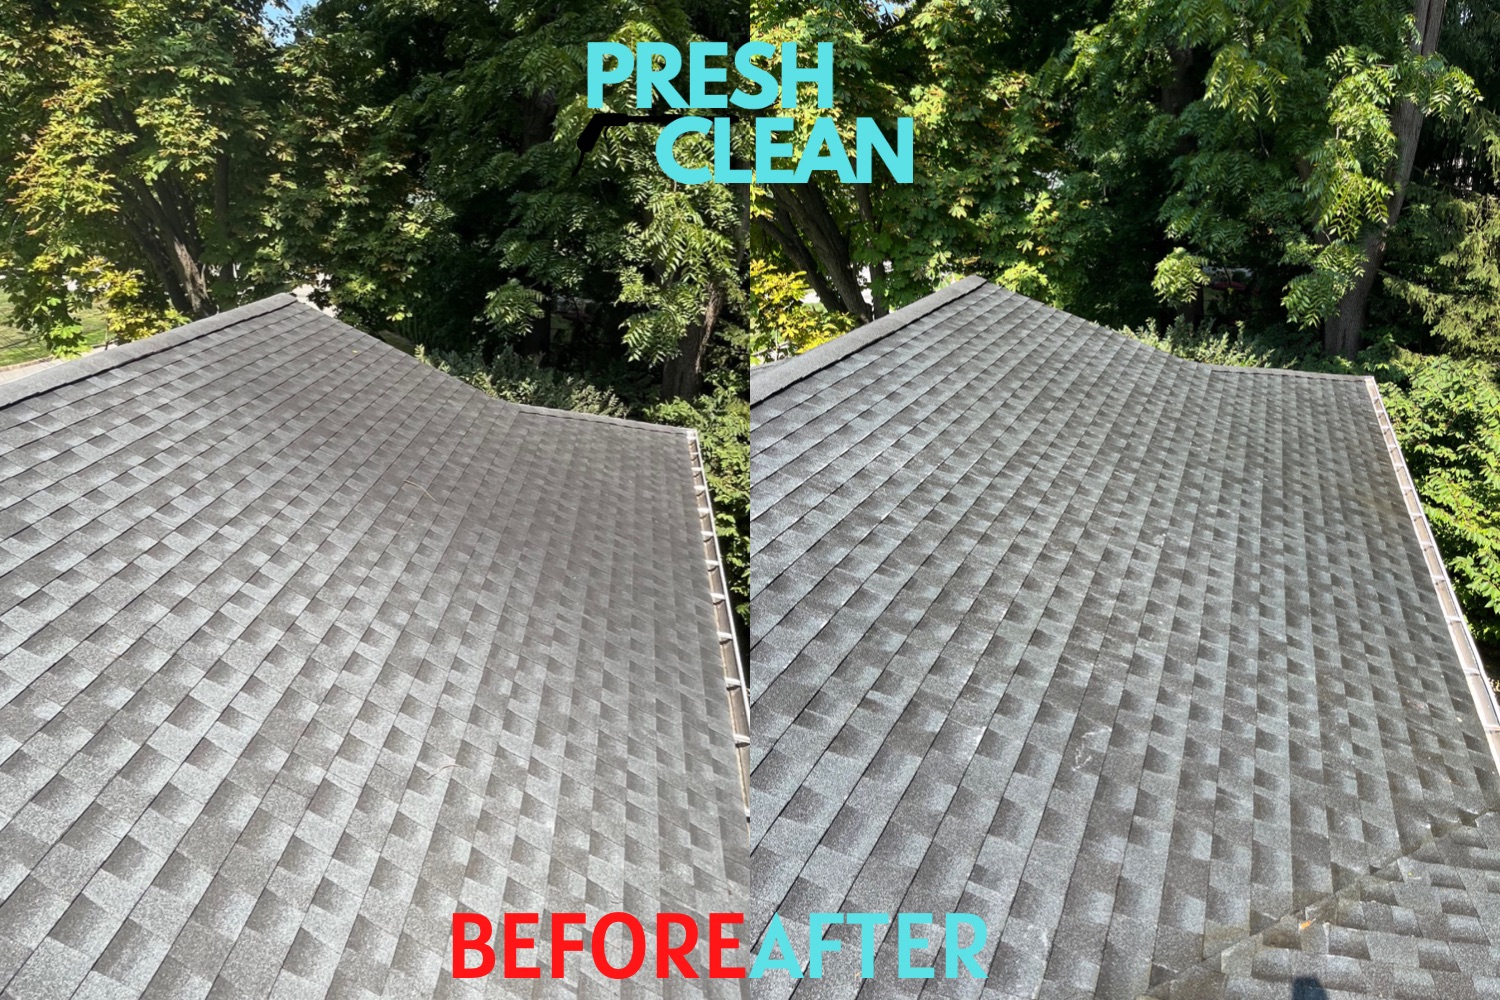 PreshClean roof washed in Thornwood, NY.